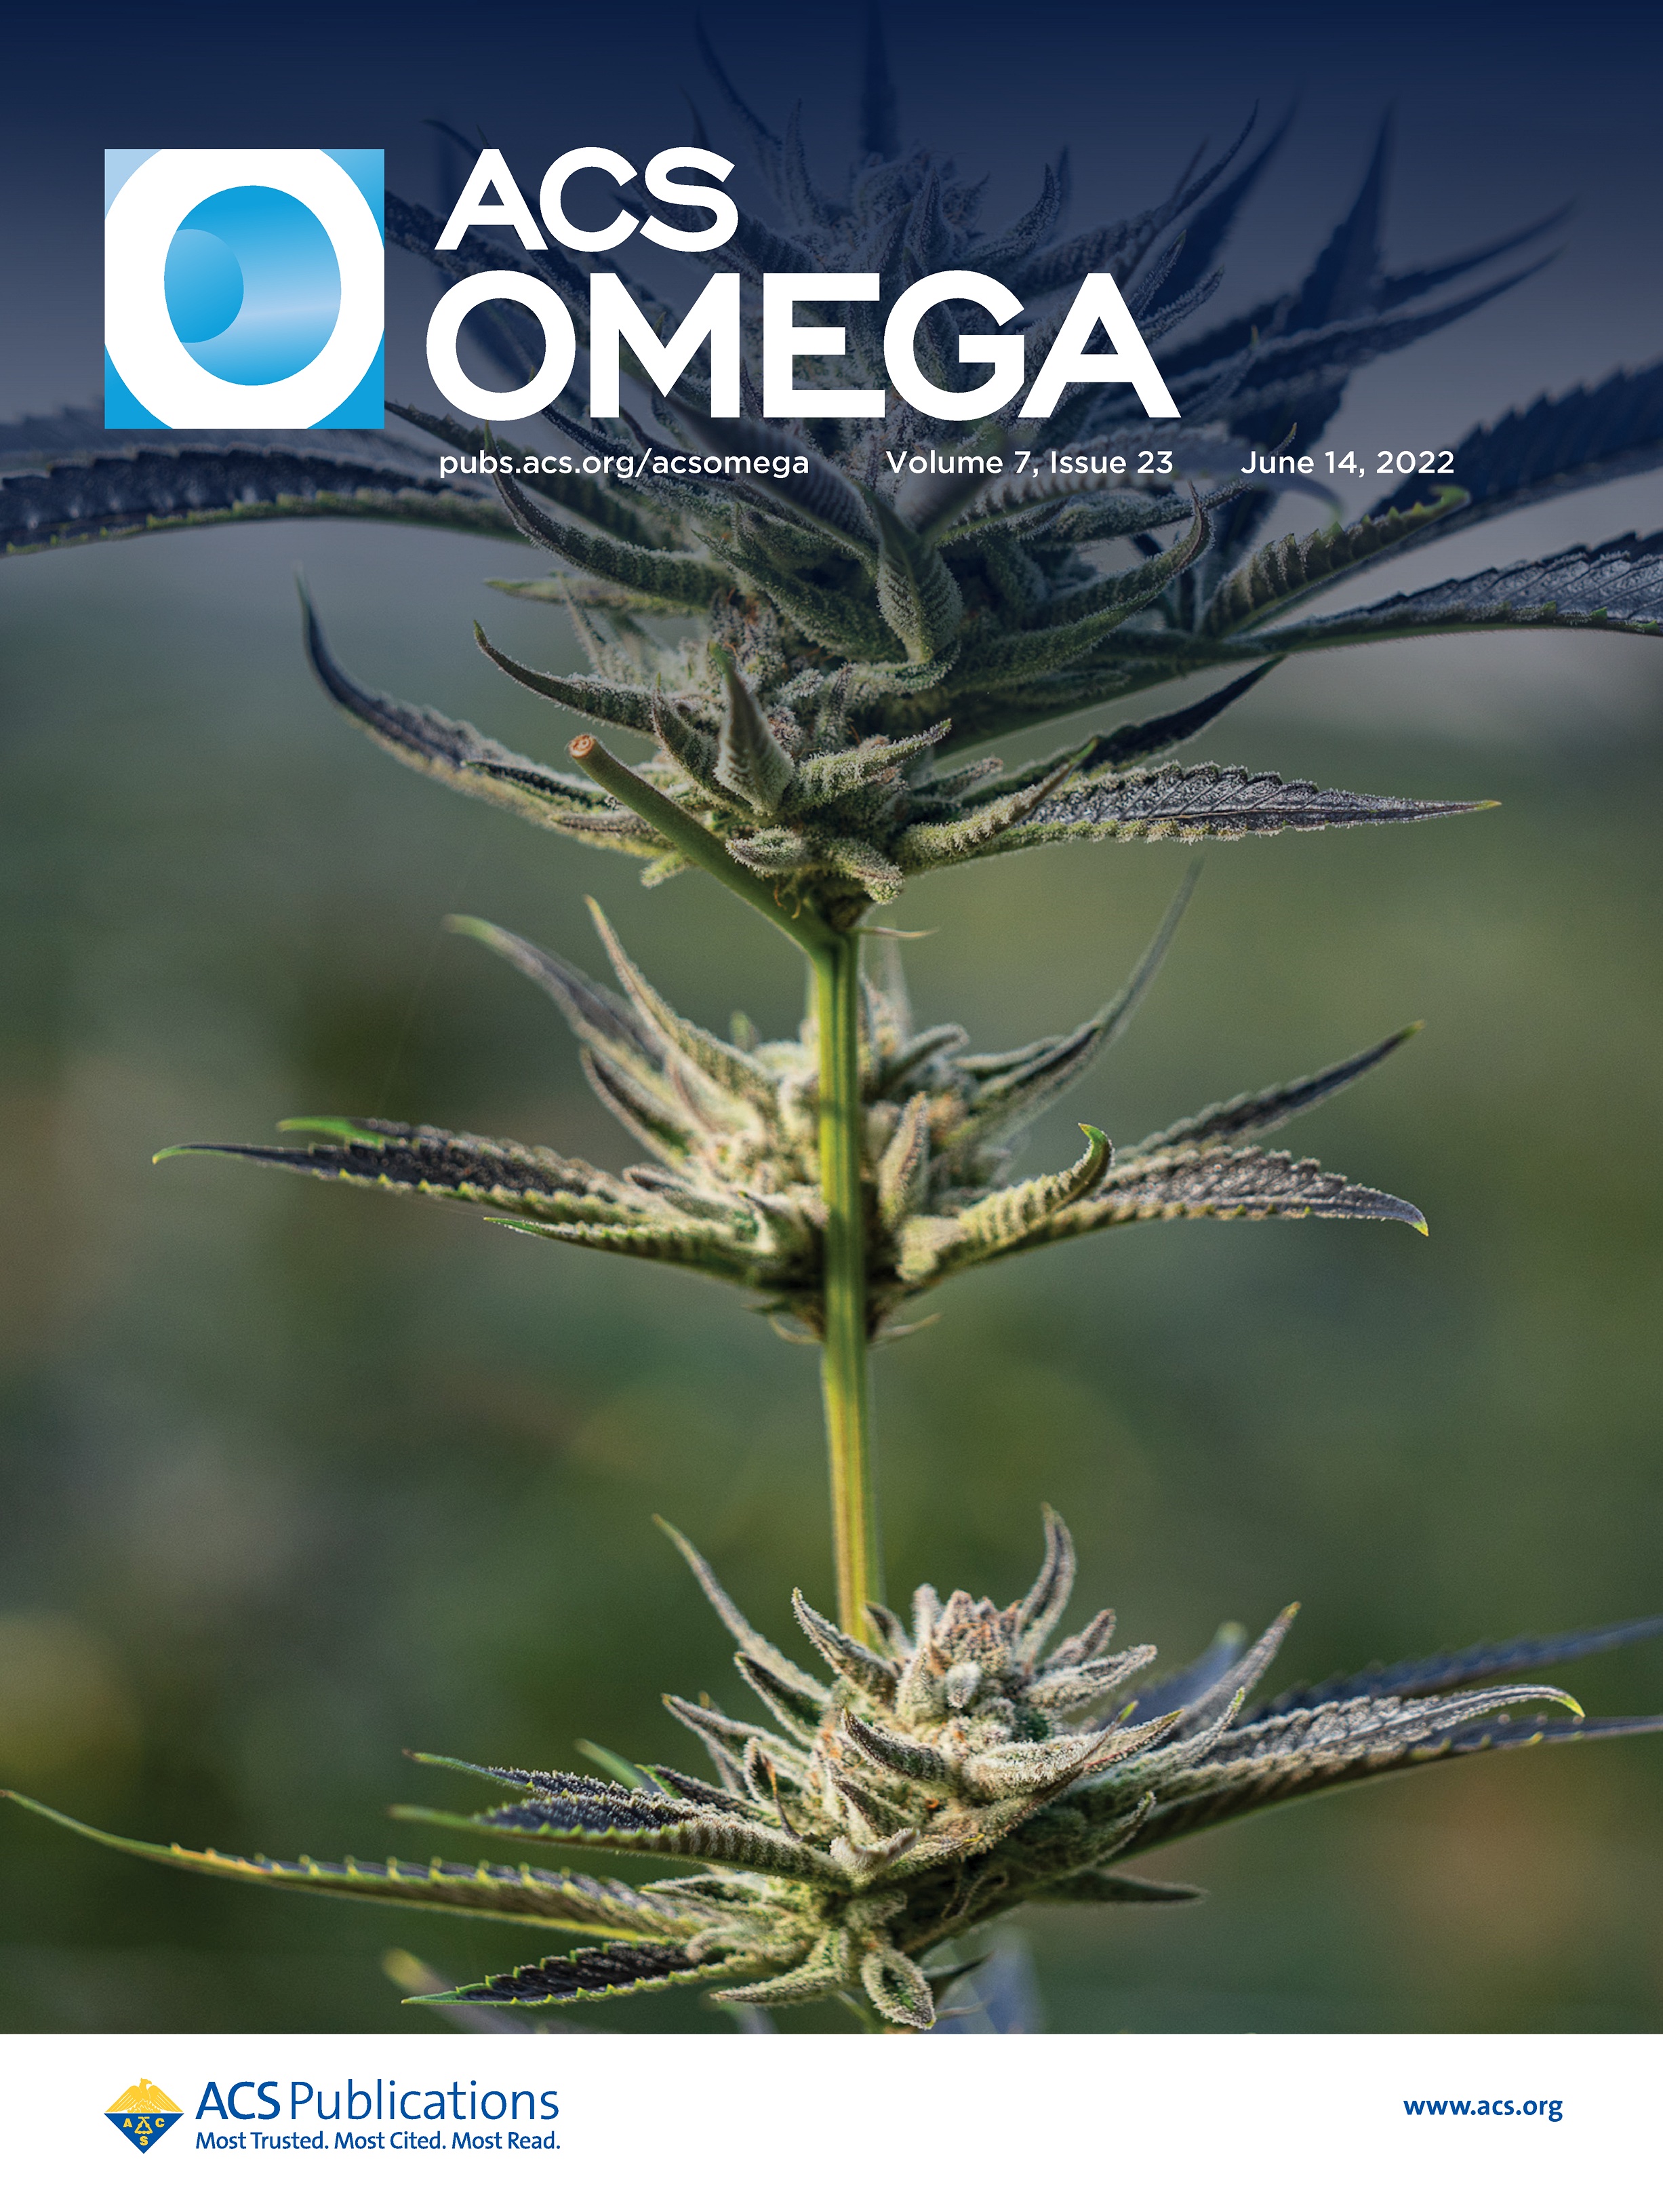 William Vizuete on Twitter: "A photo from my work on Cannabis made the cover of the ACS Omega Journal https://t.co/7iR9Y24IkQ https://t.co/kxBQatZdUT" / Twitter